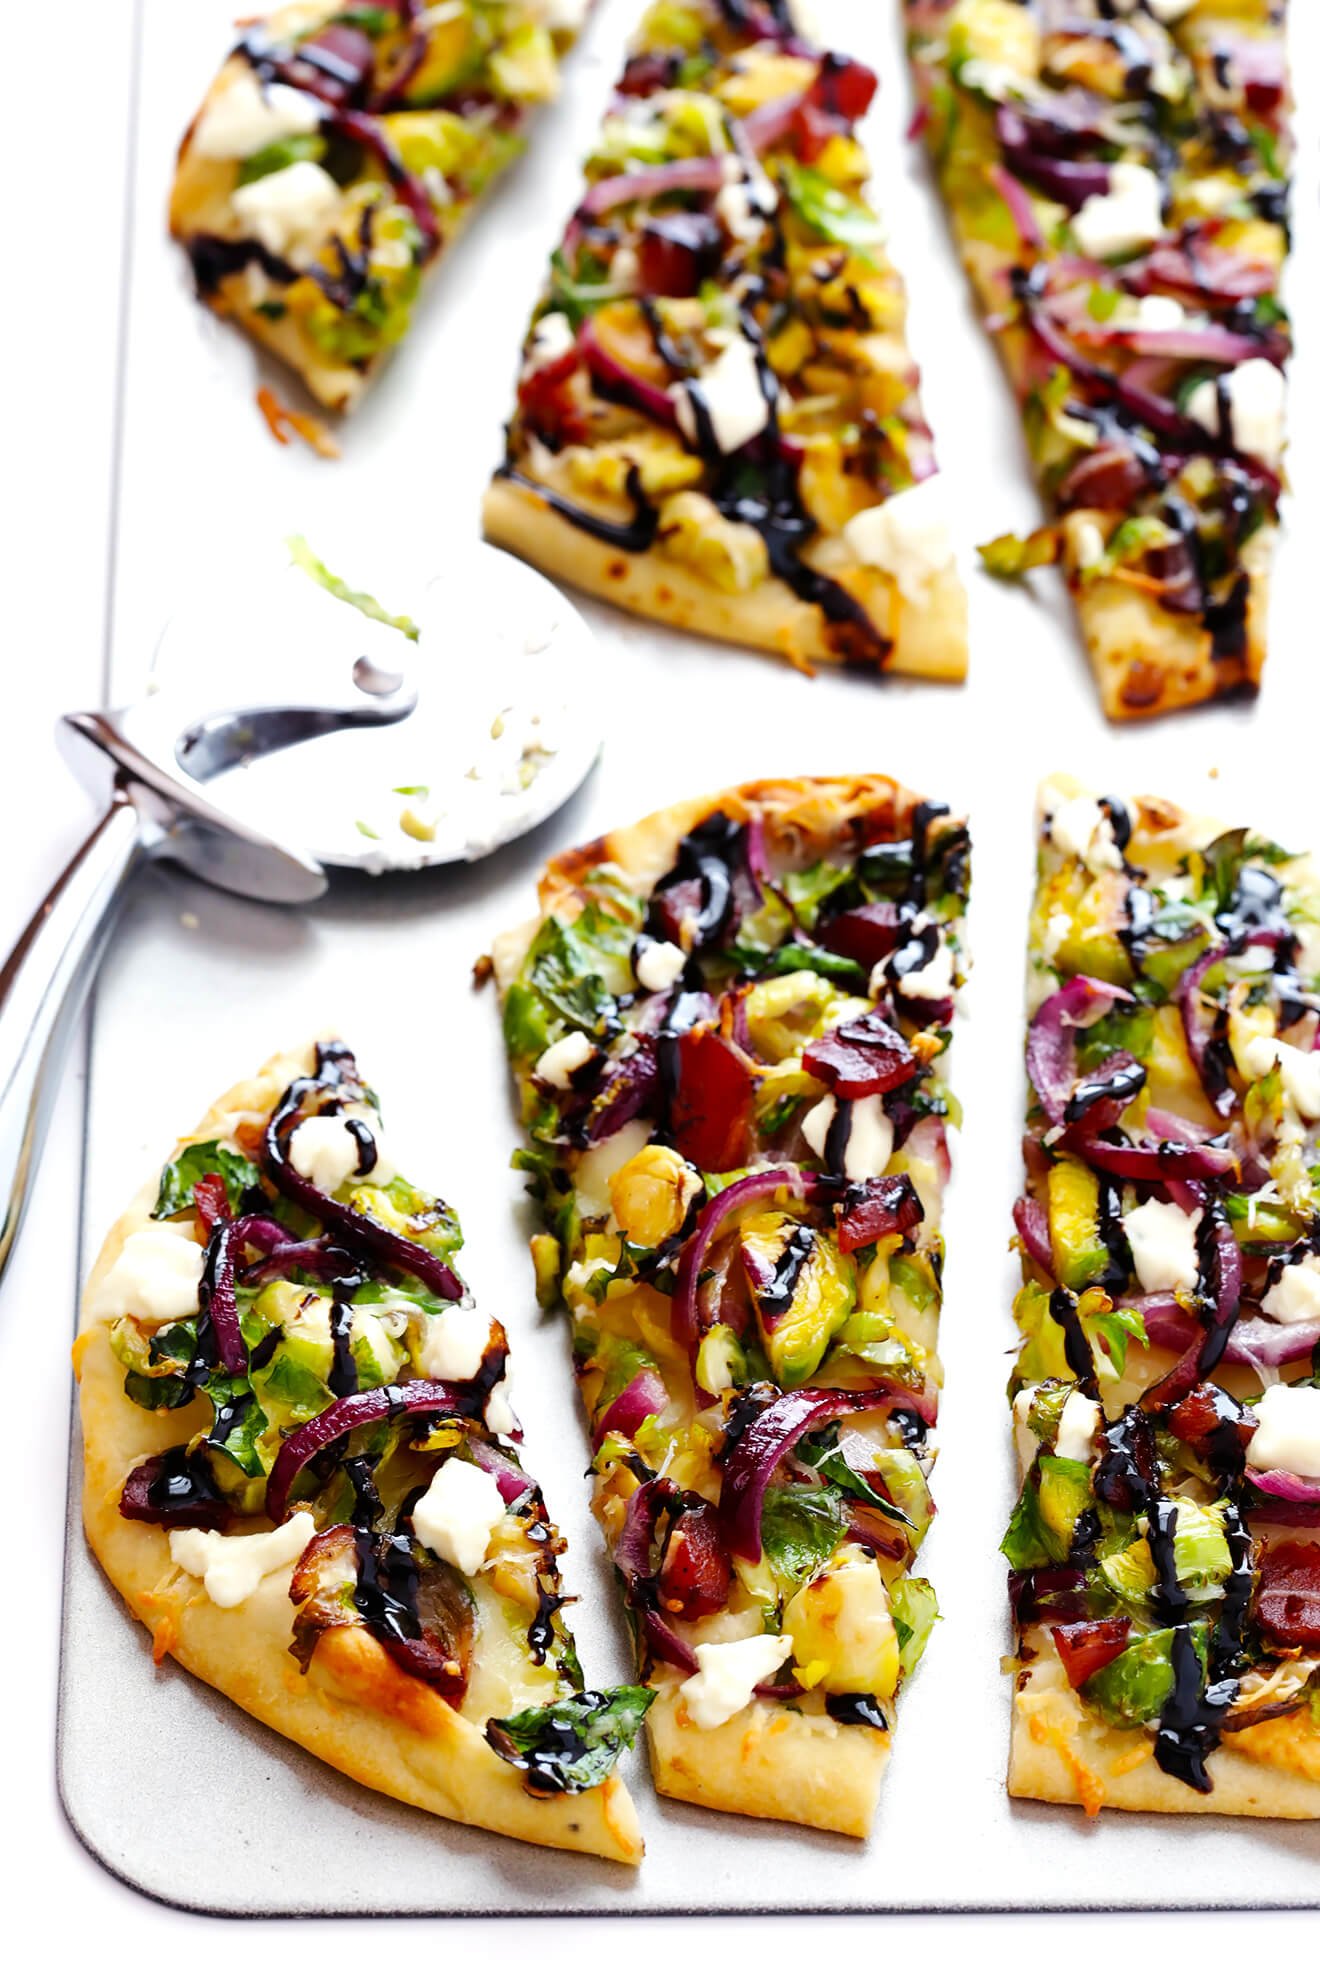 This Bacon and Brussels Sprouts Flatbread recipe is super easy to make, and SO flavorful and tasty! | gimmesomeoven.com